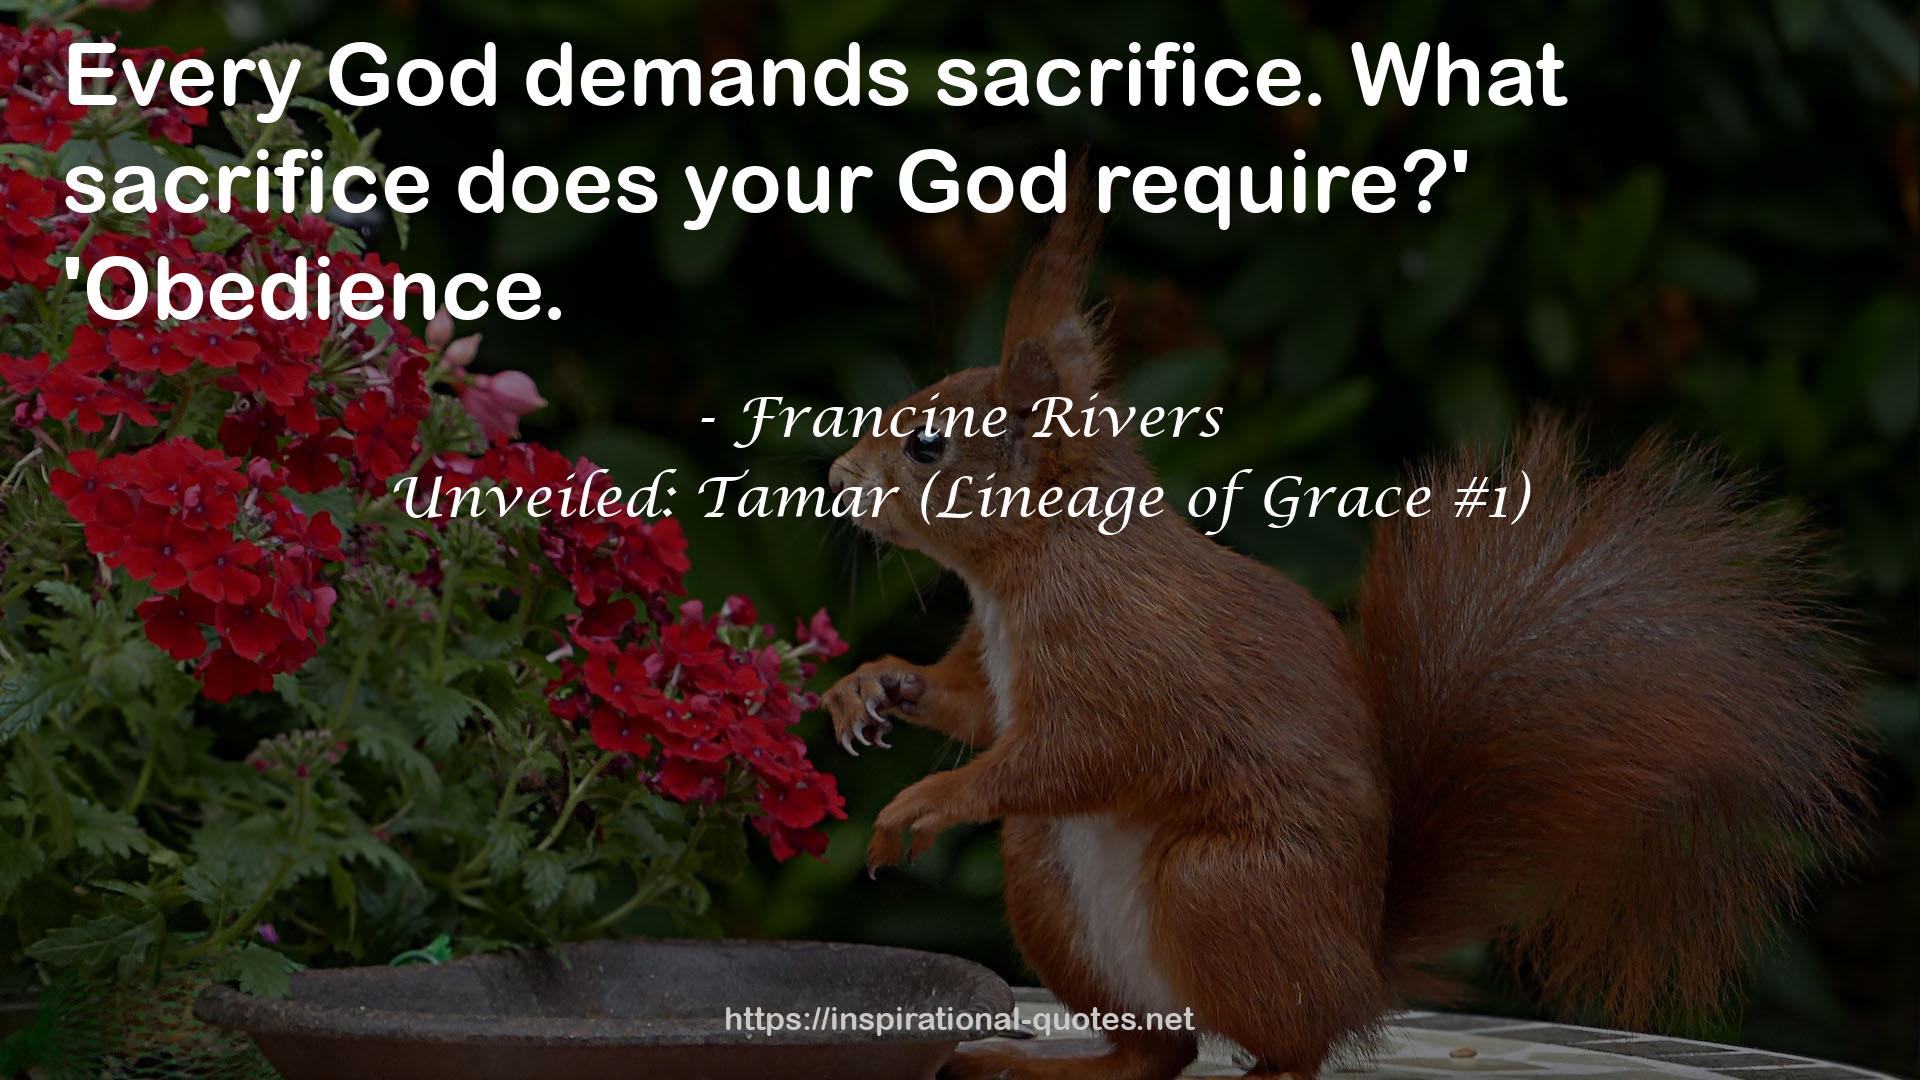 Unveiled: Tamar (Lineage of Grace #1) QUOTES